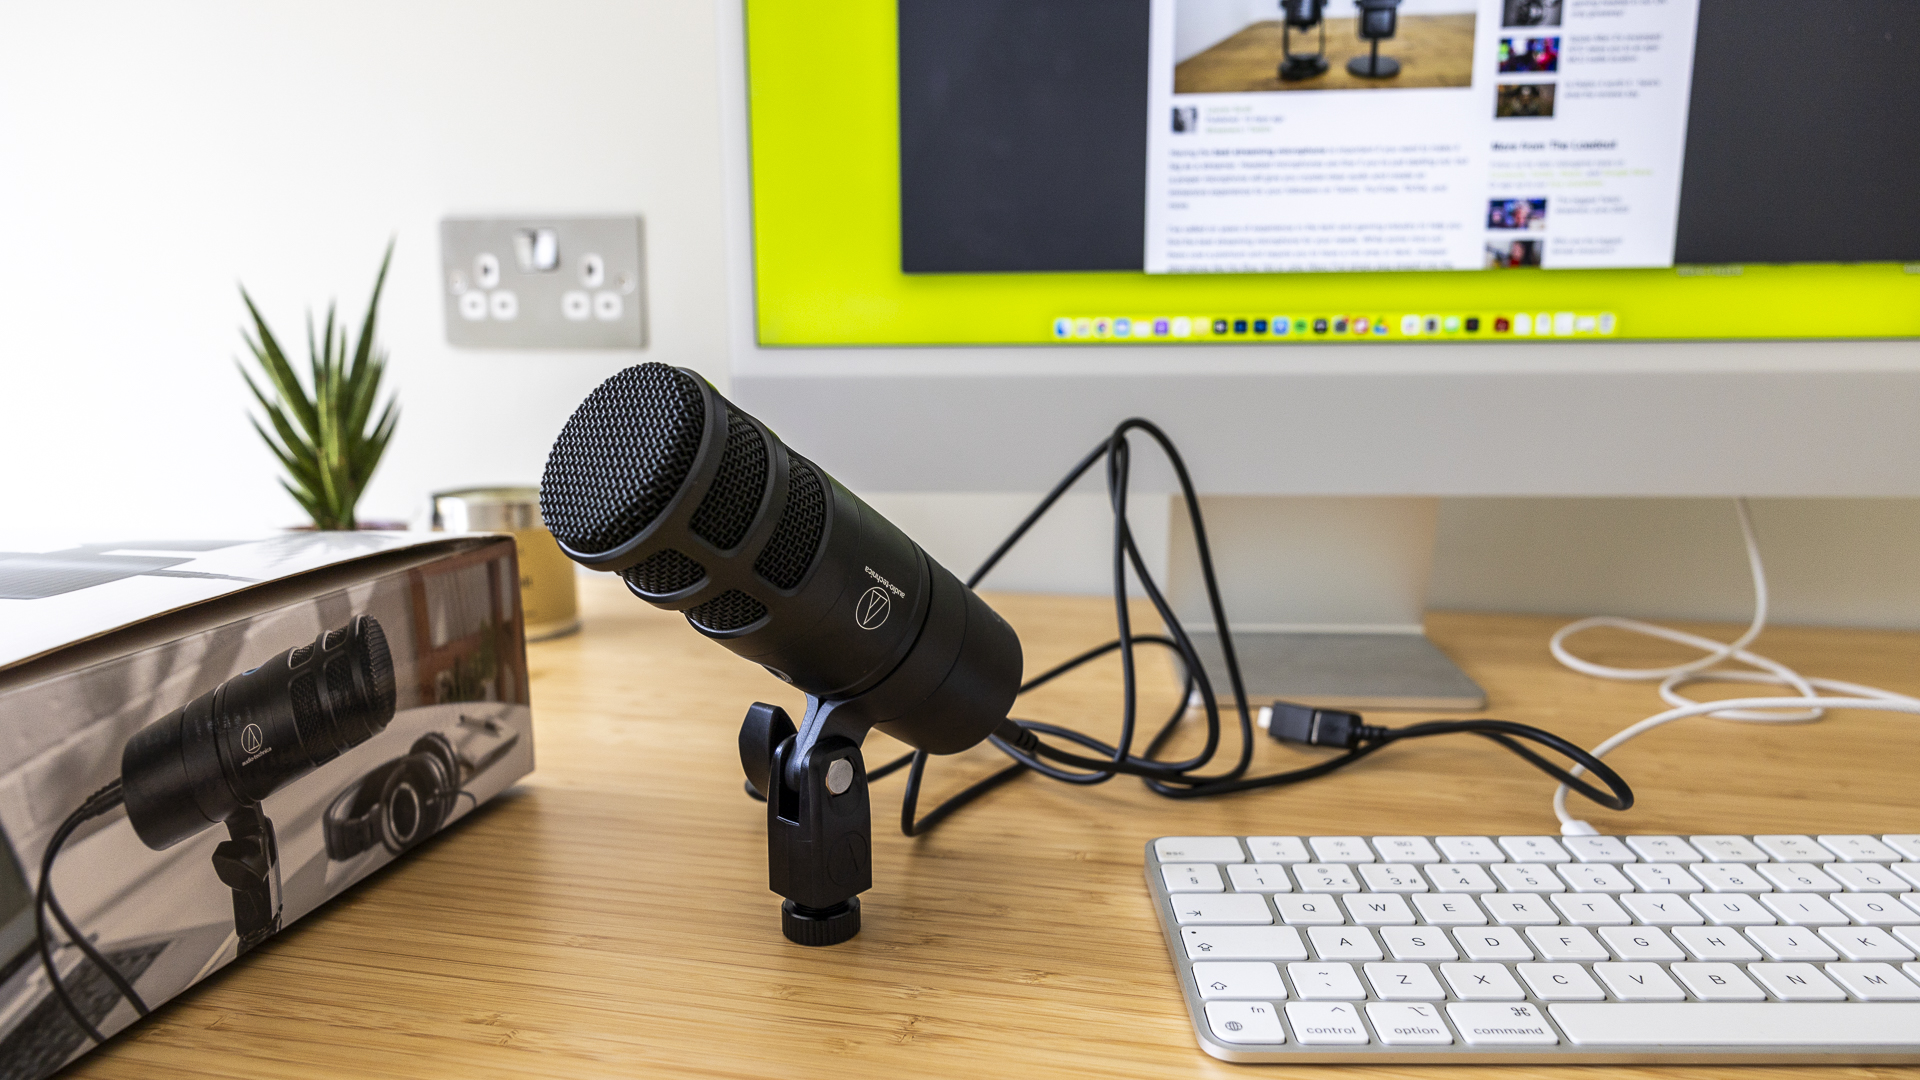 Audio Technica review image showing the microphone on someone's desk near a box and a keyboard.